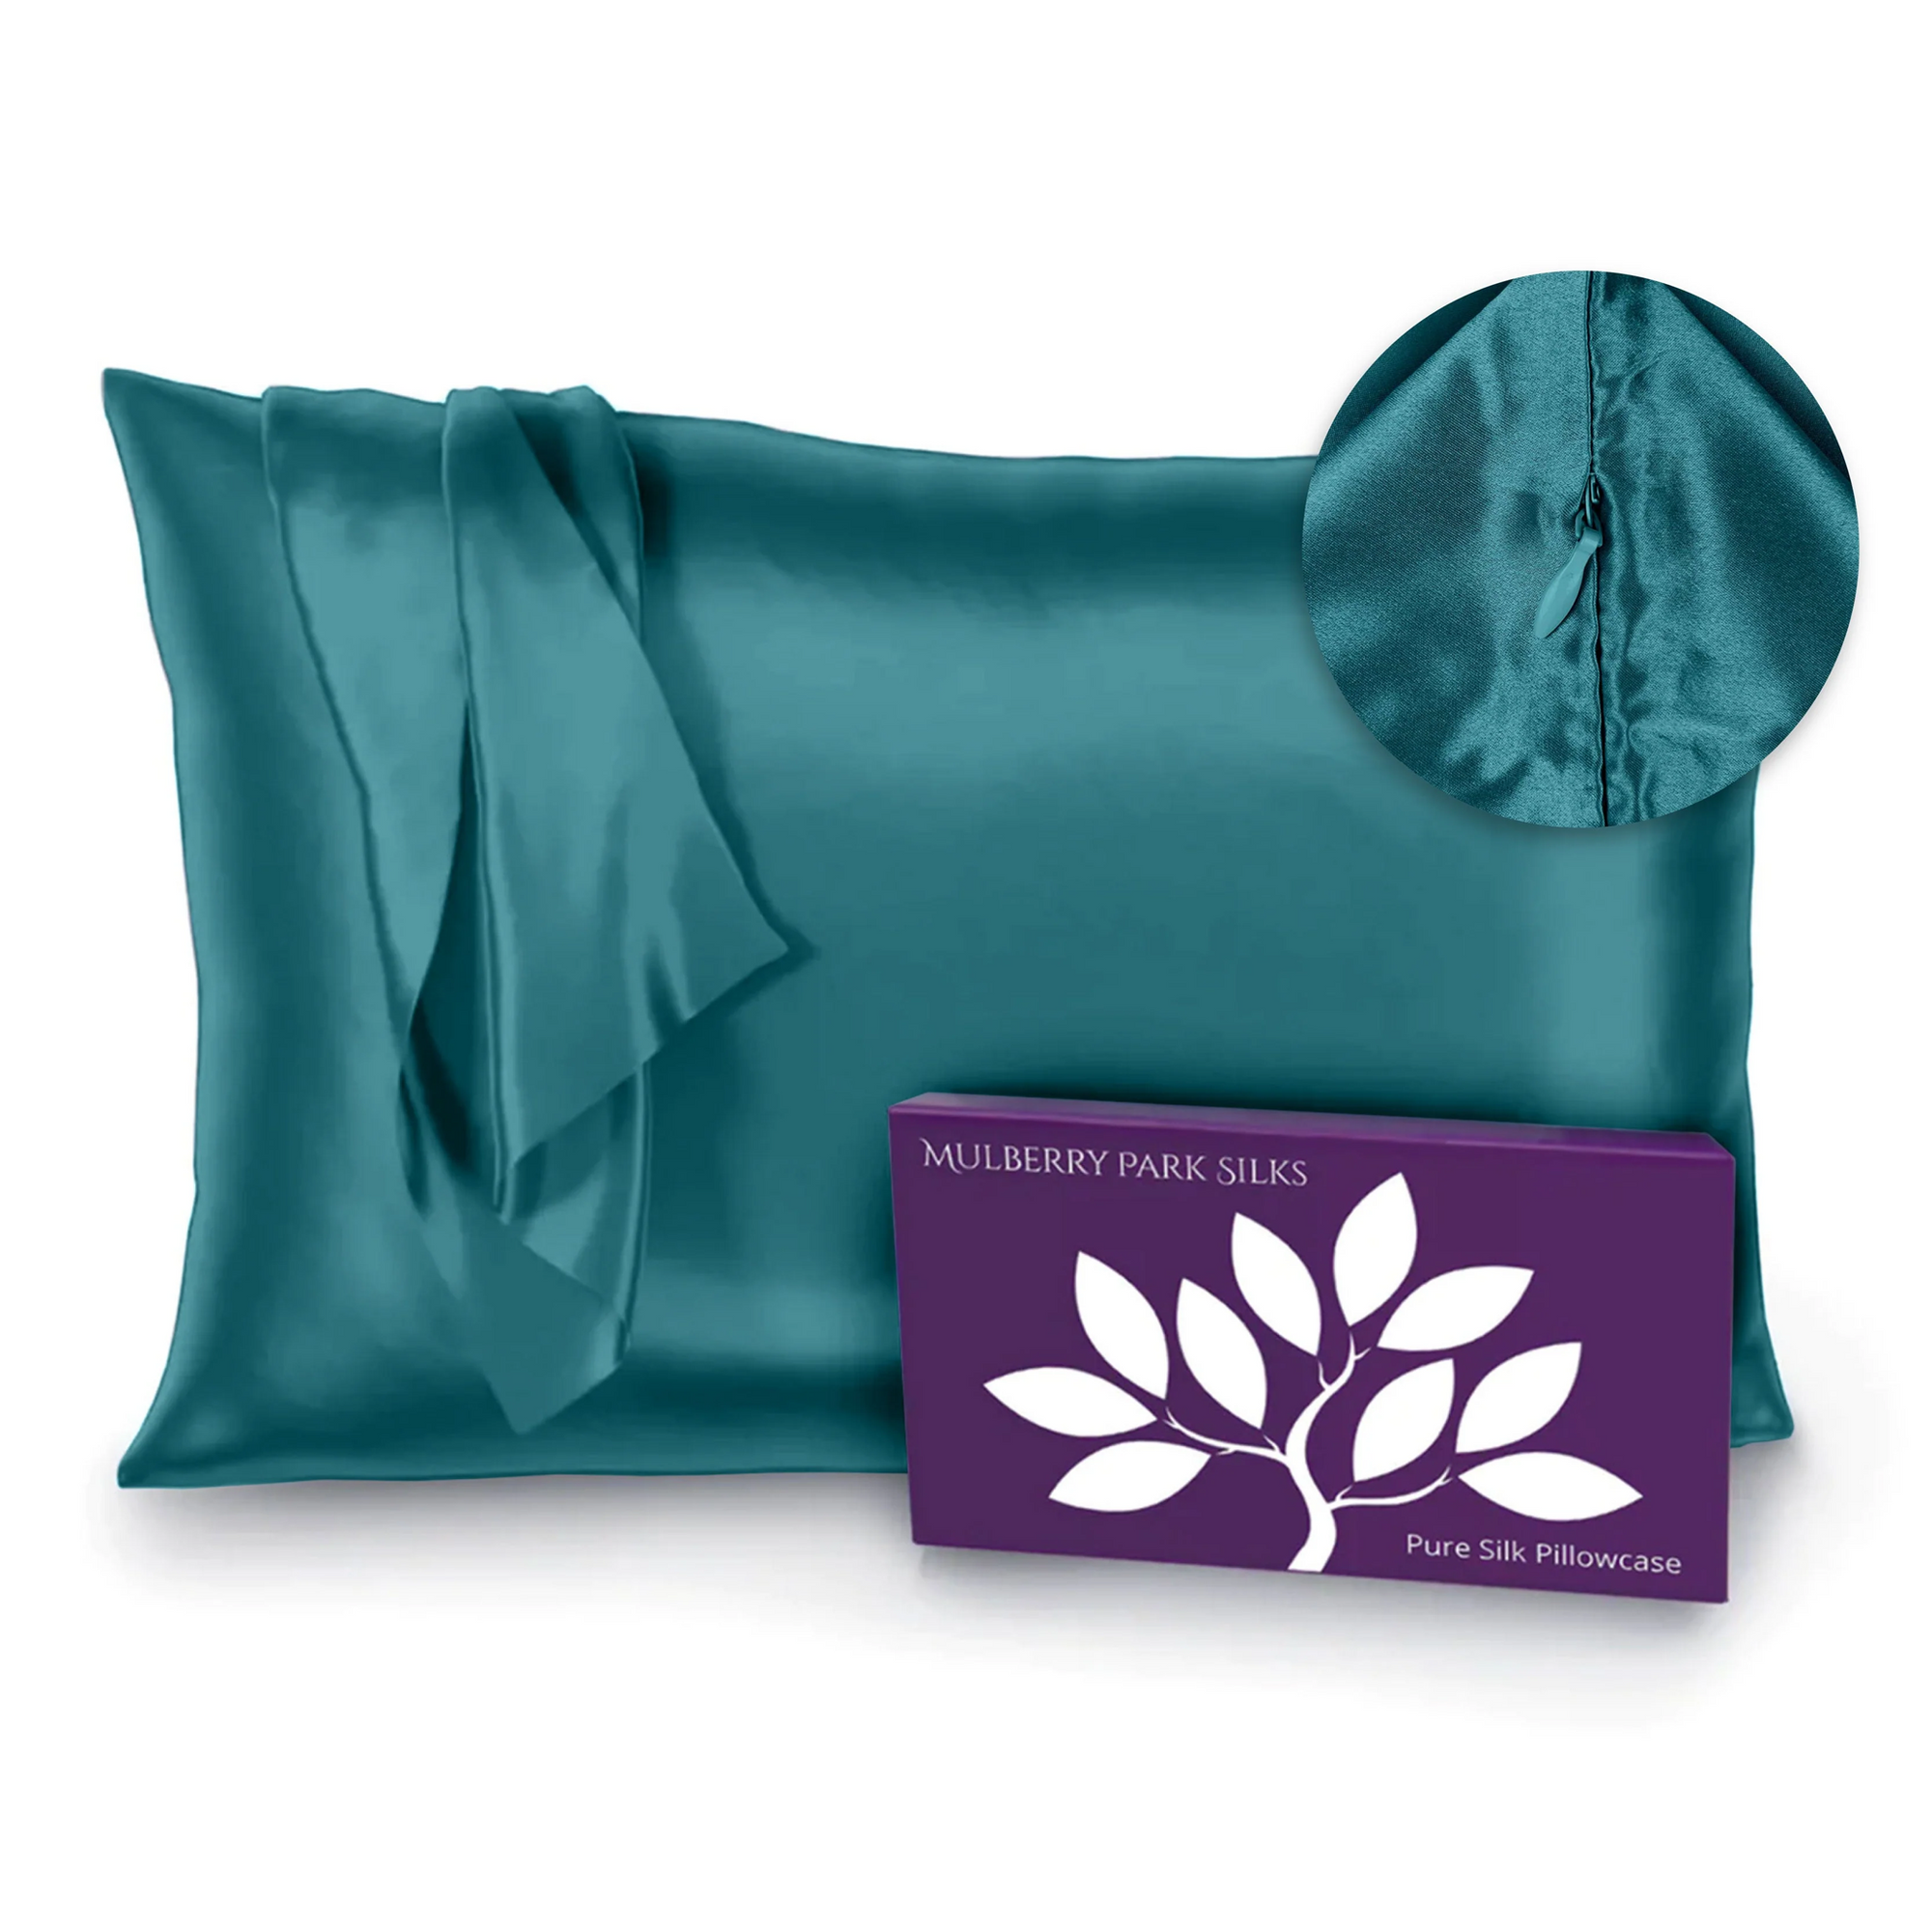 Teal Silo Image of Mulberry Park Silks Deluxe 22 Momme Pure Silk Pillowcase with Zipper Detail and Box